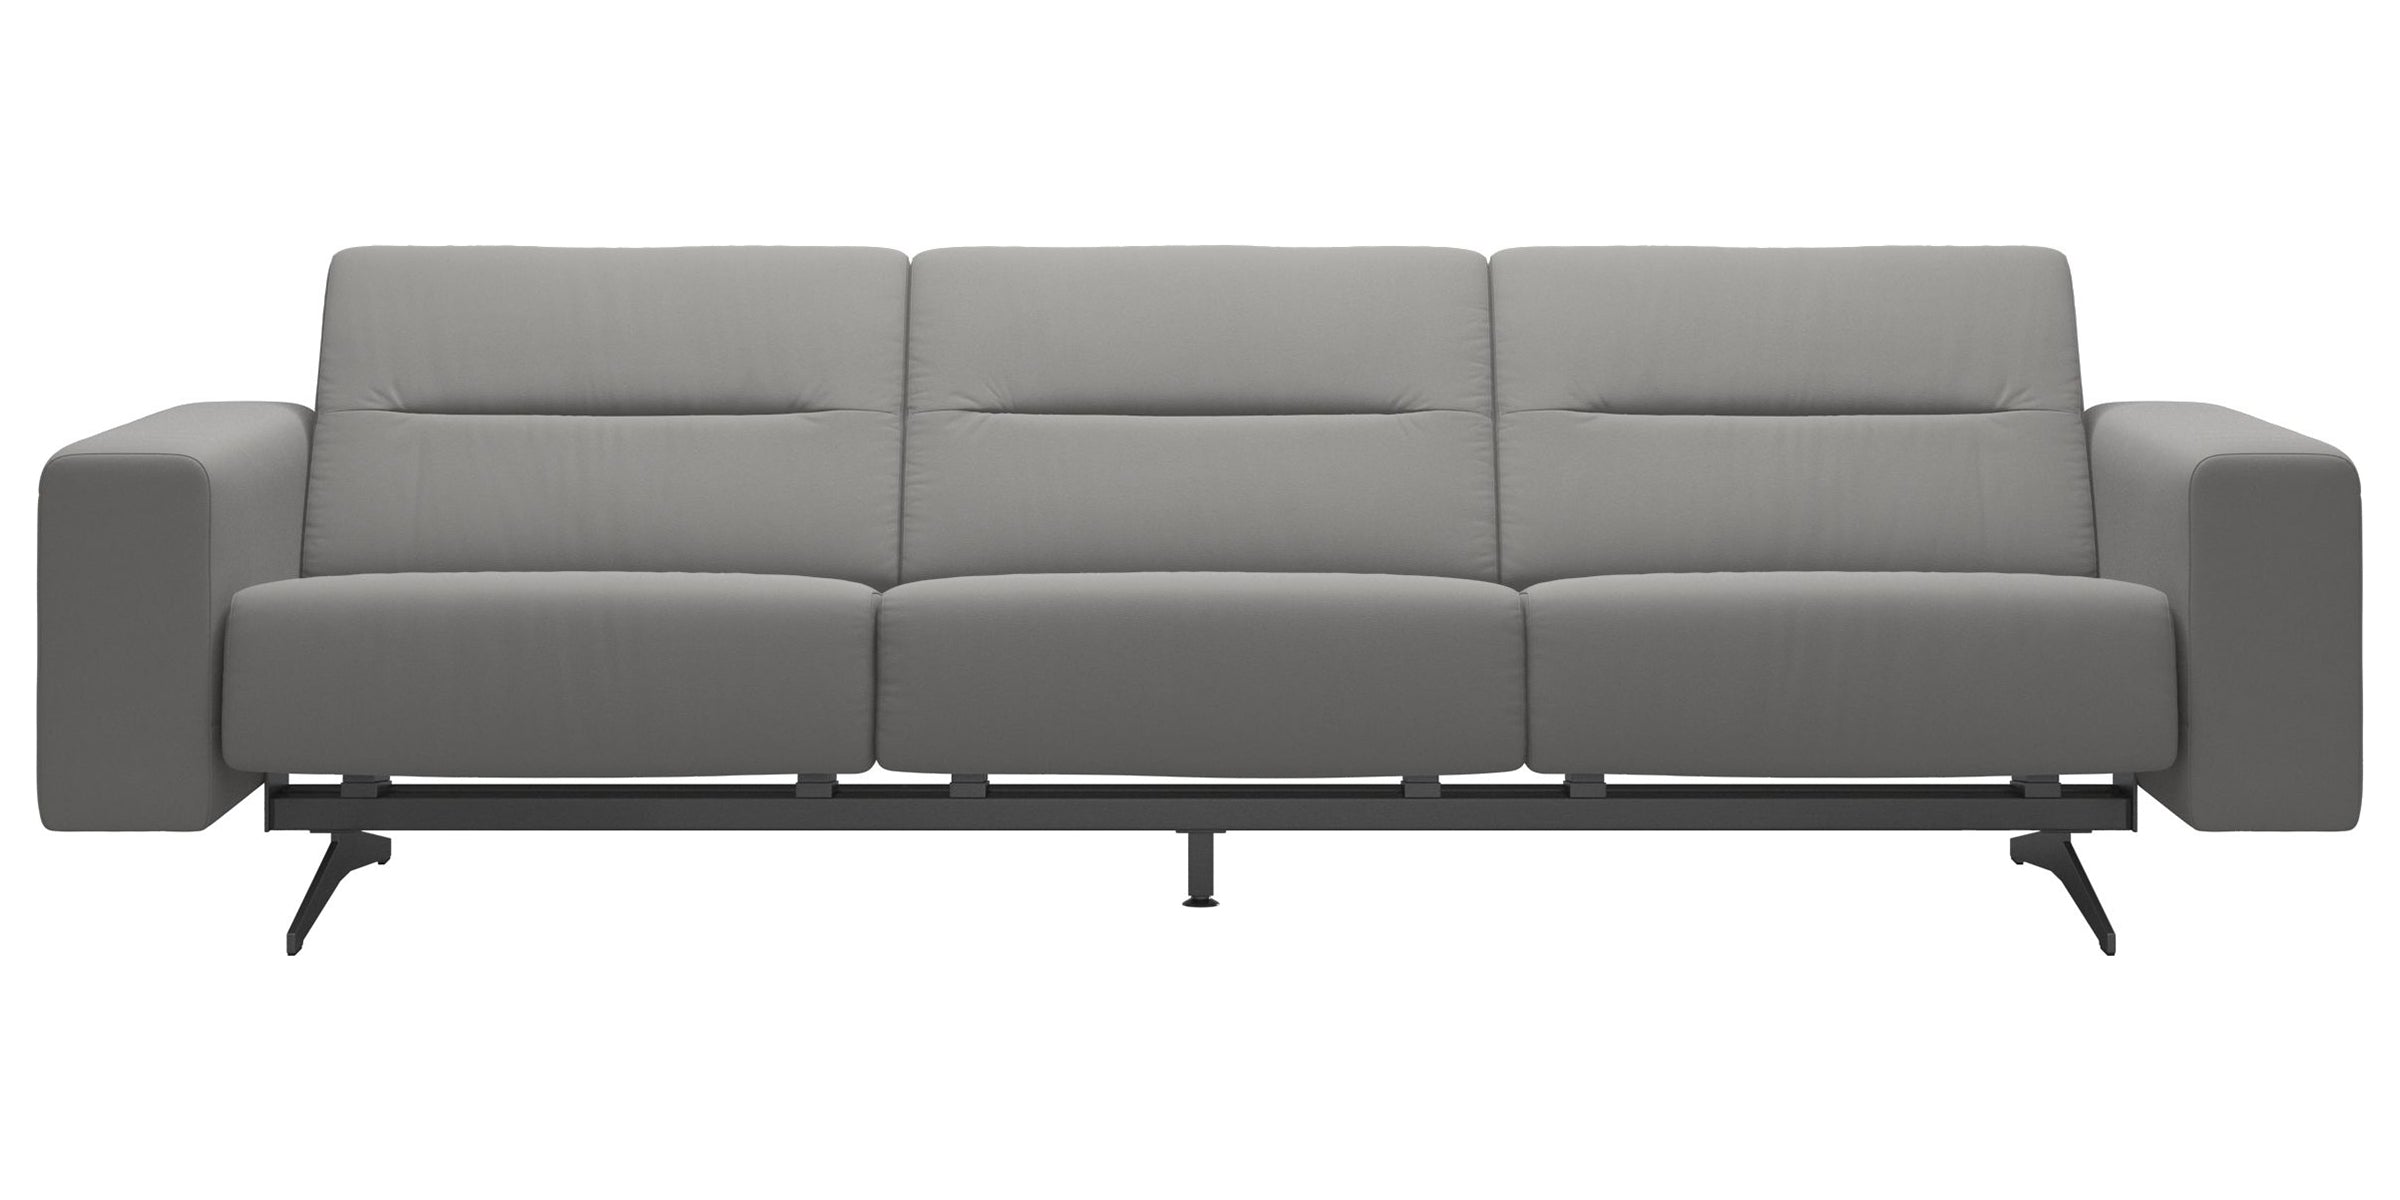 Paloma Leather Silver Grey & Chrome Base | Stressless Stella 3-Seater Sofa with S1 Arm | Valley Ridge Furniture